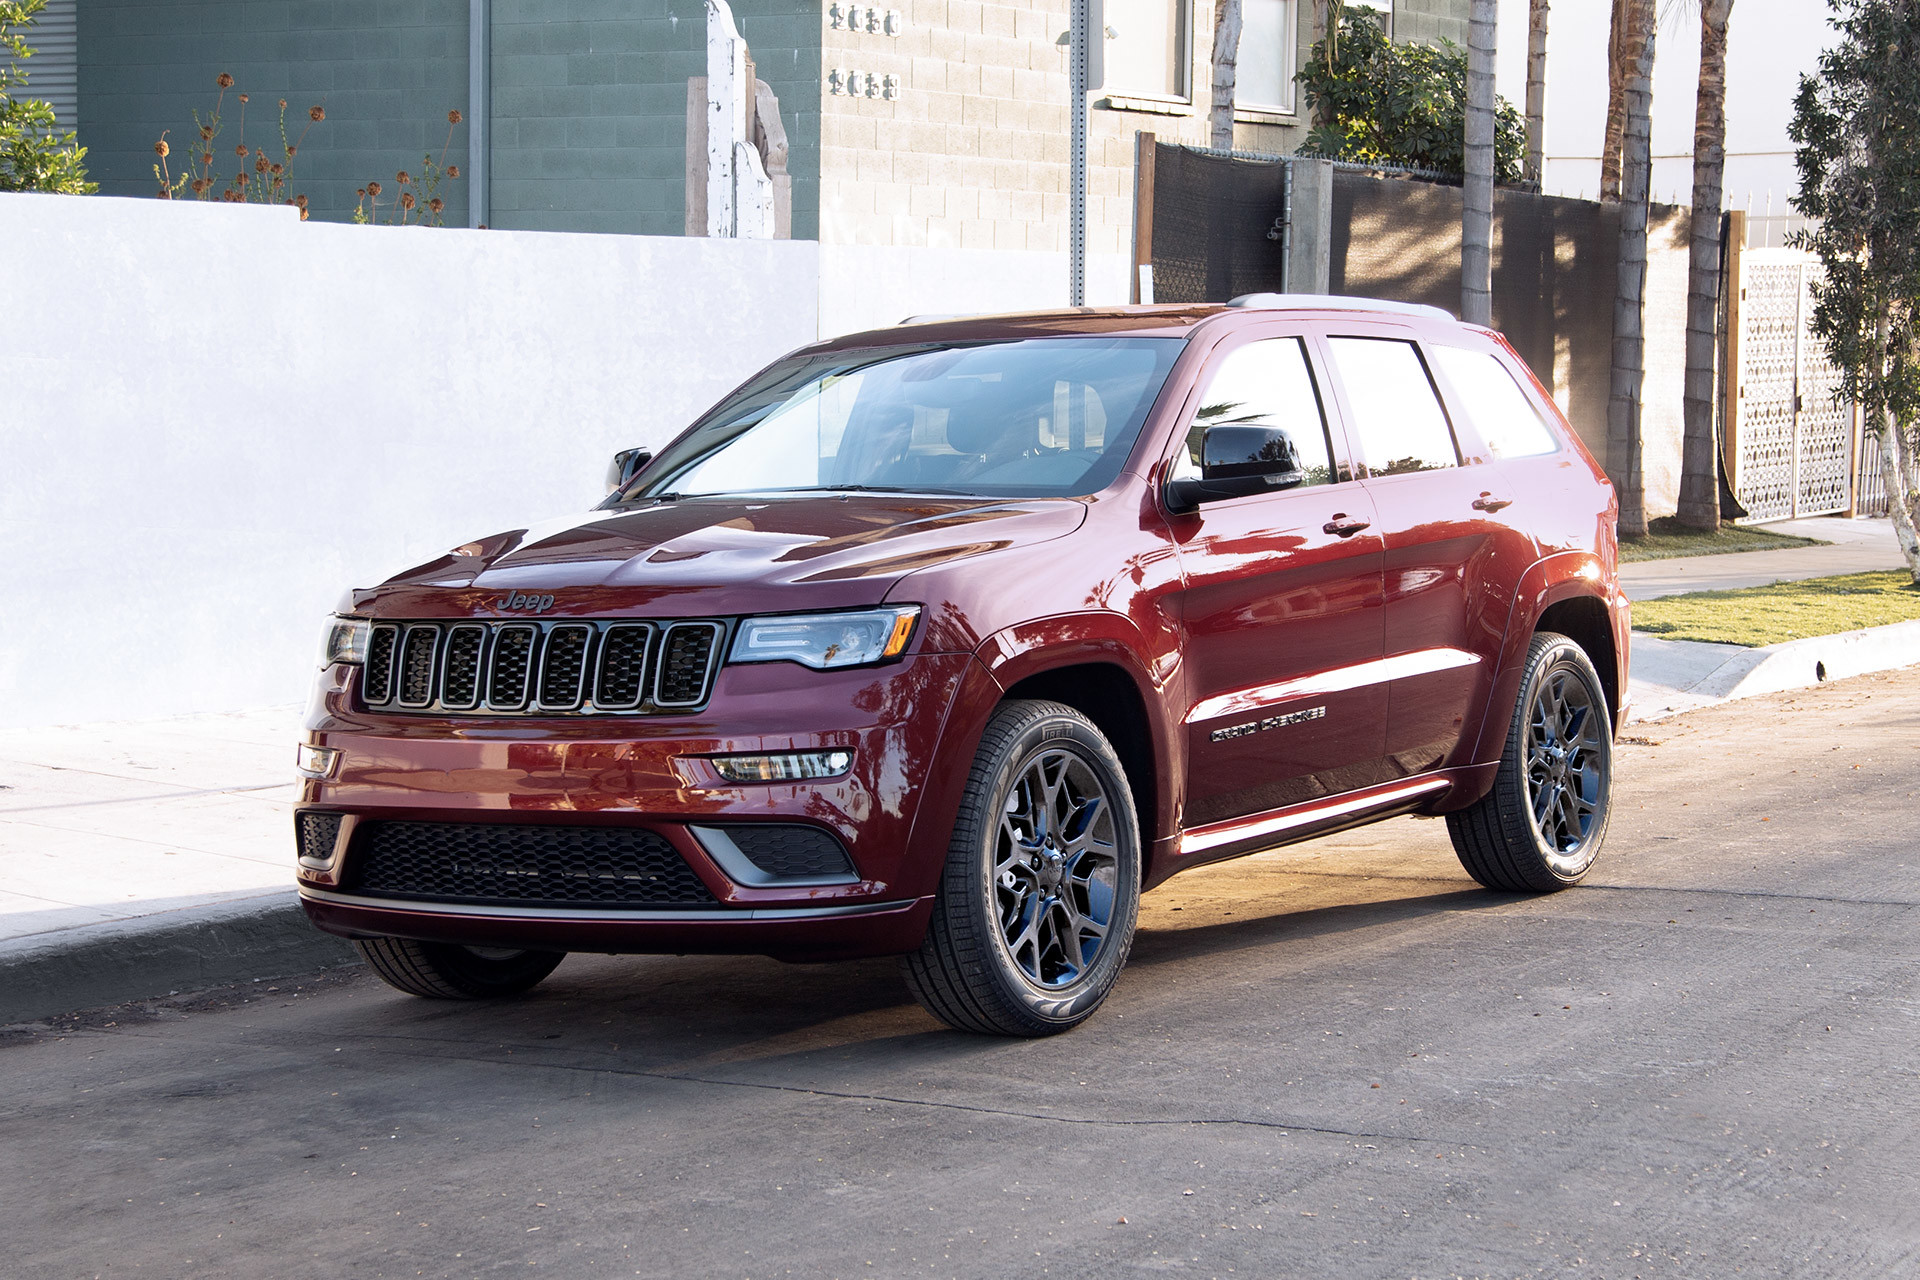 2022 Grand Cherokee Limited X in Velvet Red parked on the side of a urban road